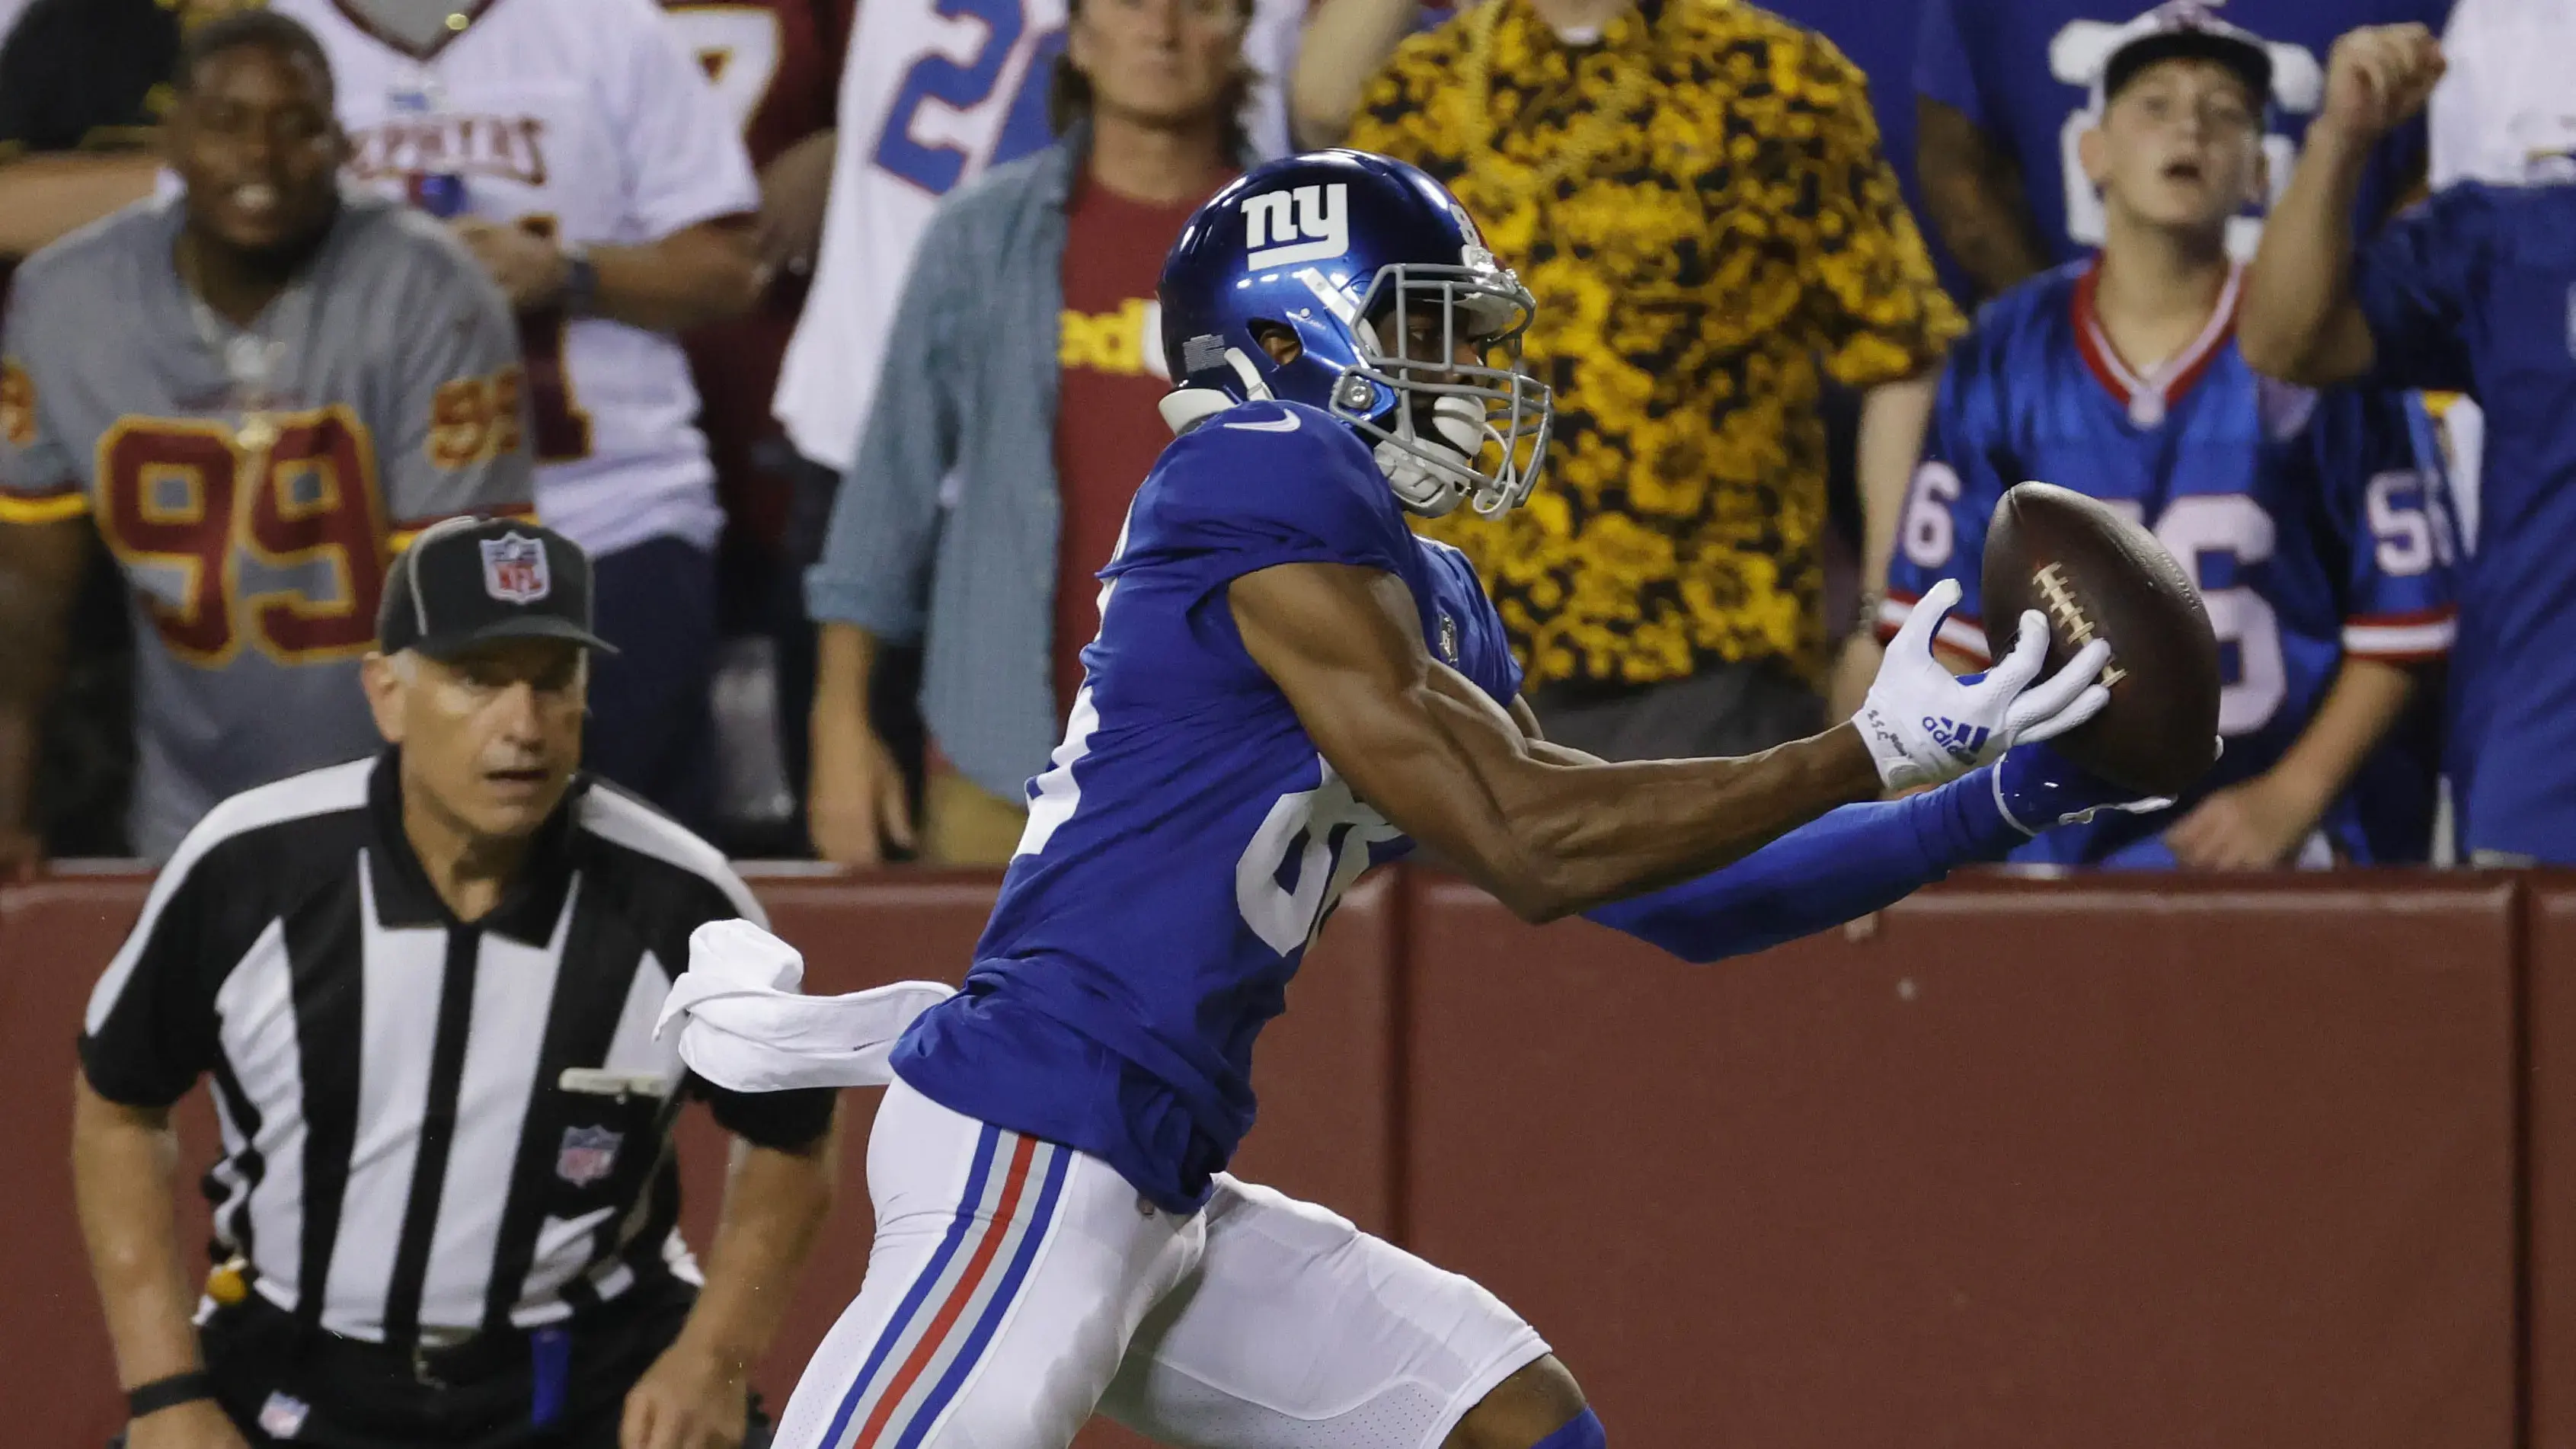 Sep 16, 2021; Landover, Maryland, USA; New York Giants wide receiver Darius Slayton (86) catches a touchdown pass as Washington Football Team cornerback William Jackson III (23) defends in the third quarter at FedExField. Mandatory Credit: Geoff Burke-USA TODAY Sports / © Geoff Burke-USA TODAY Sports